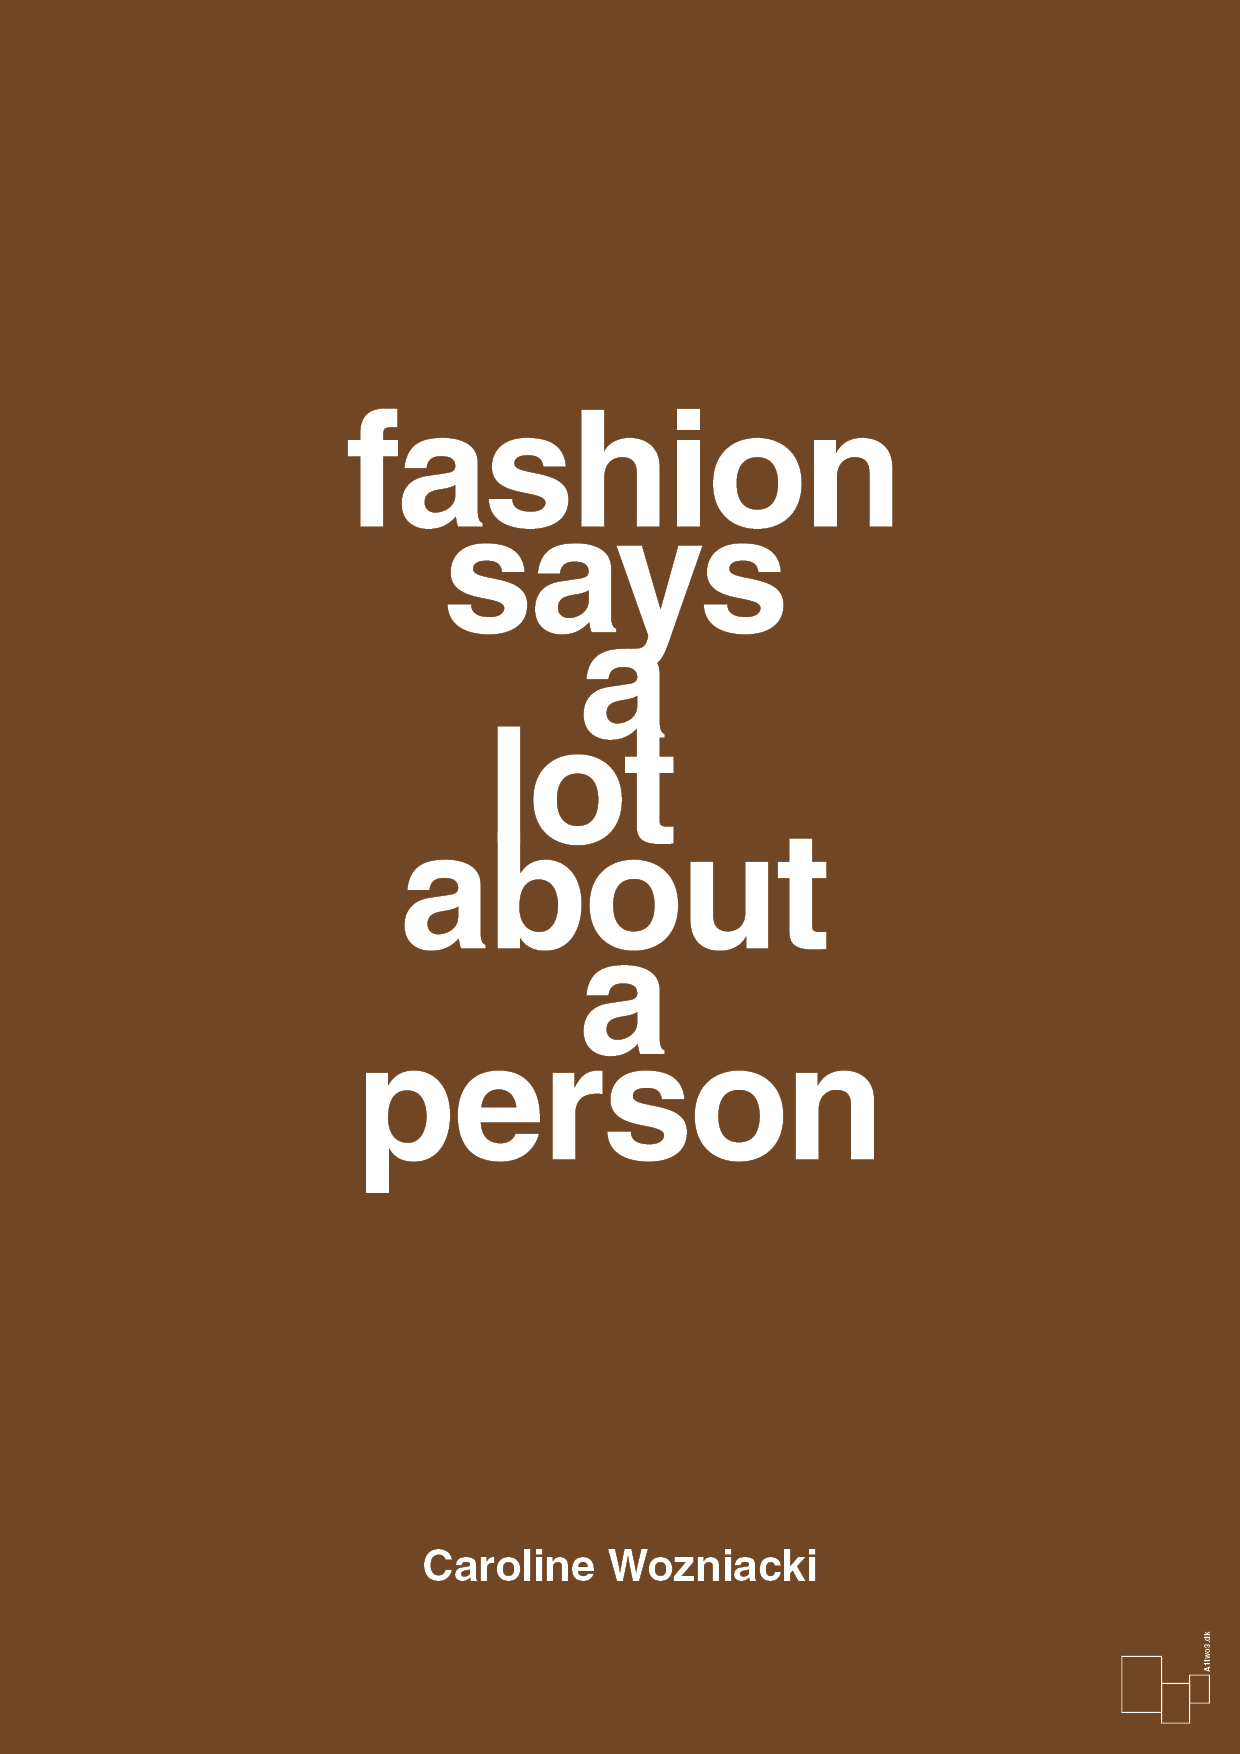 fashion says a lot about a person - Plakat med Citater i Dark Brown